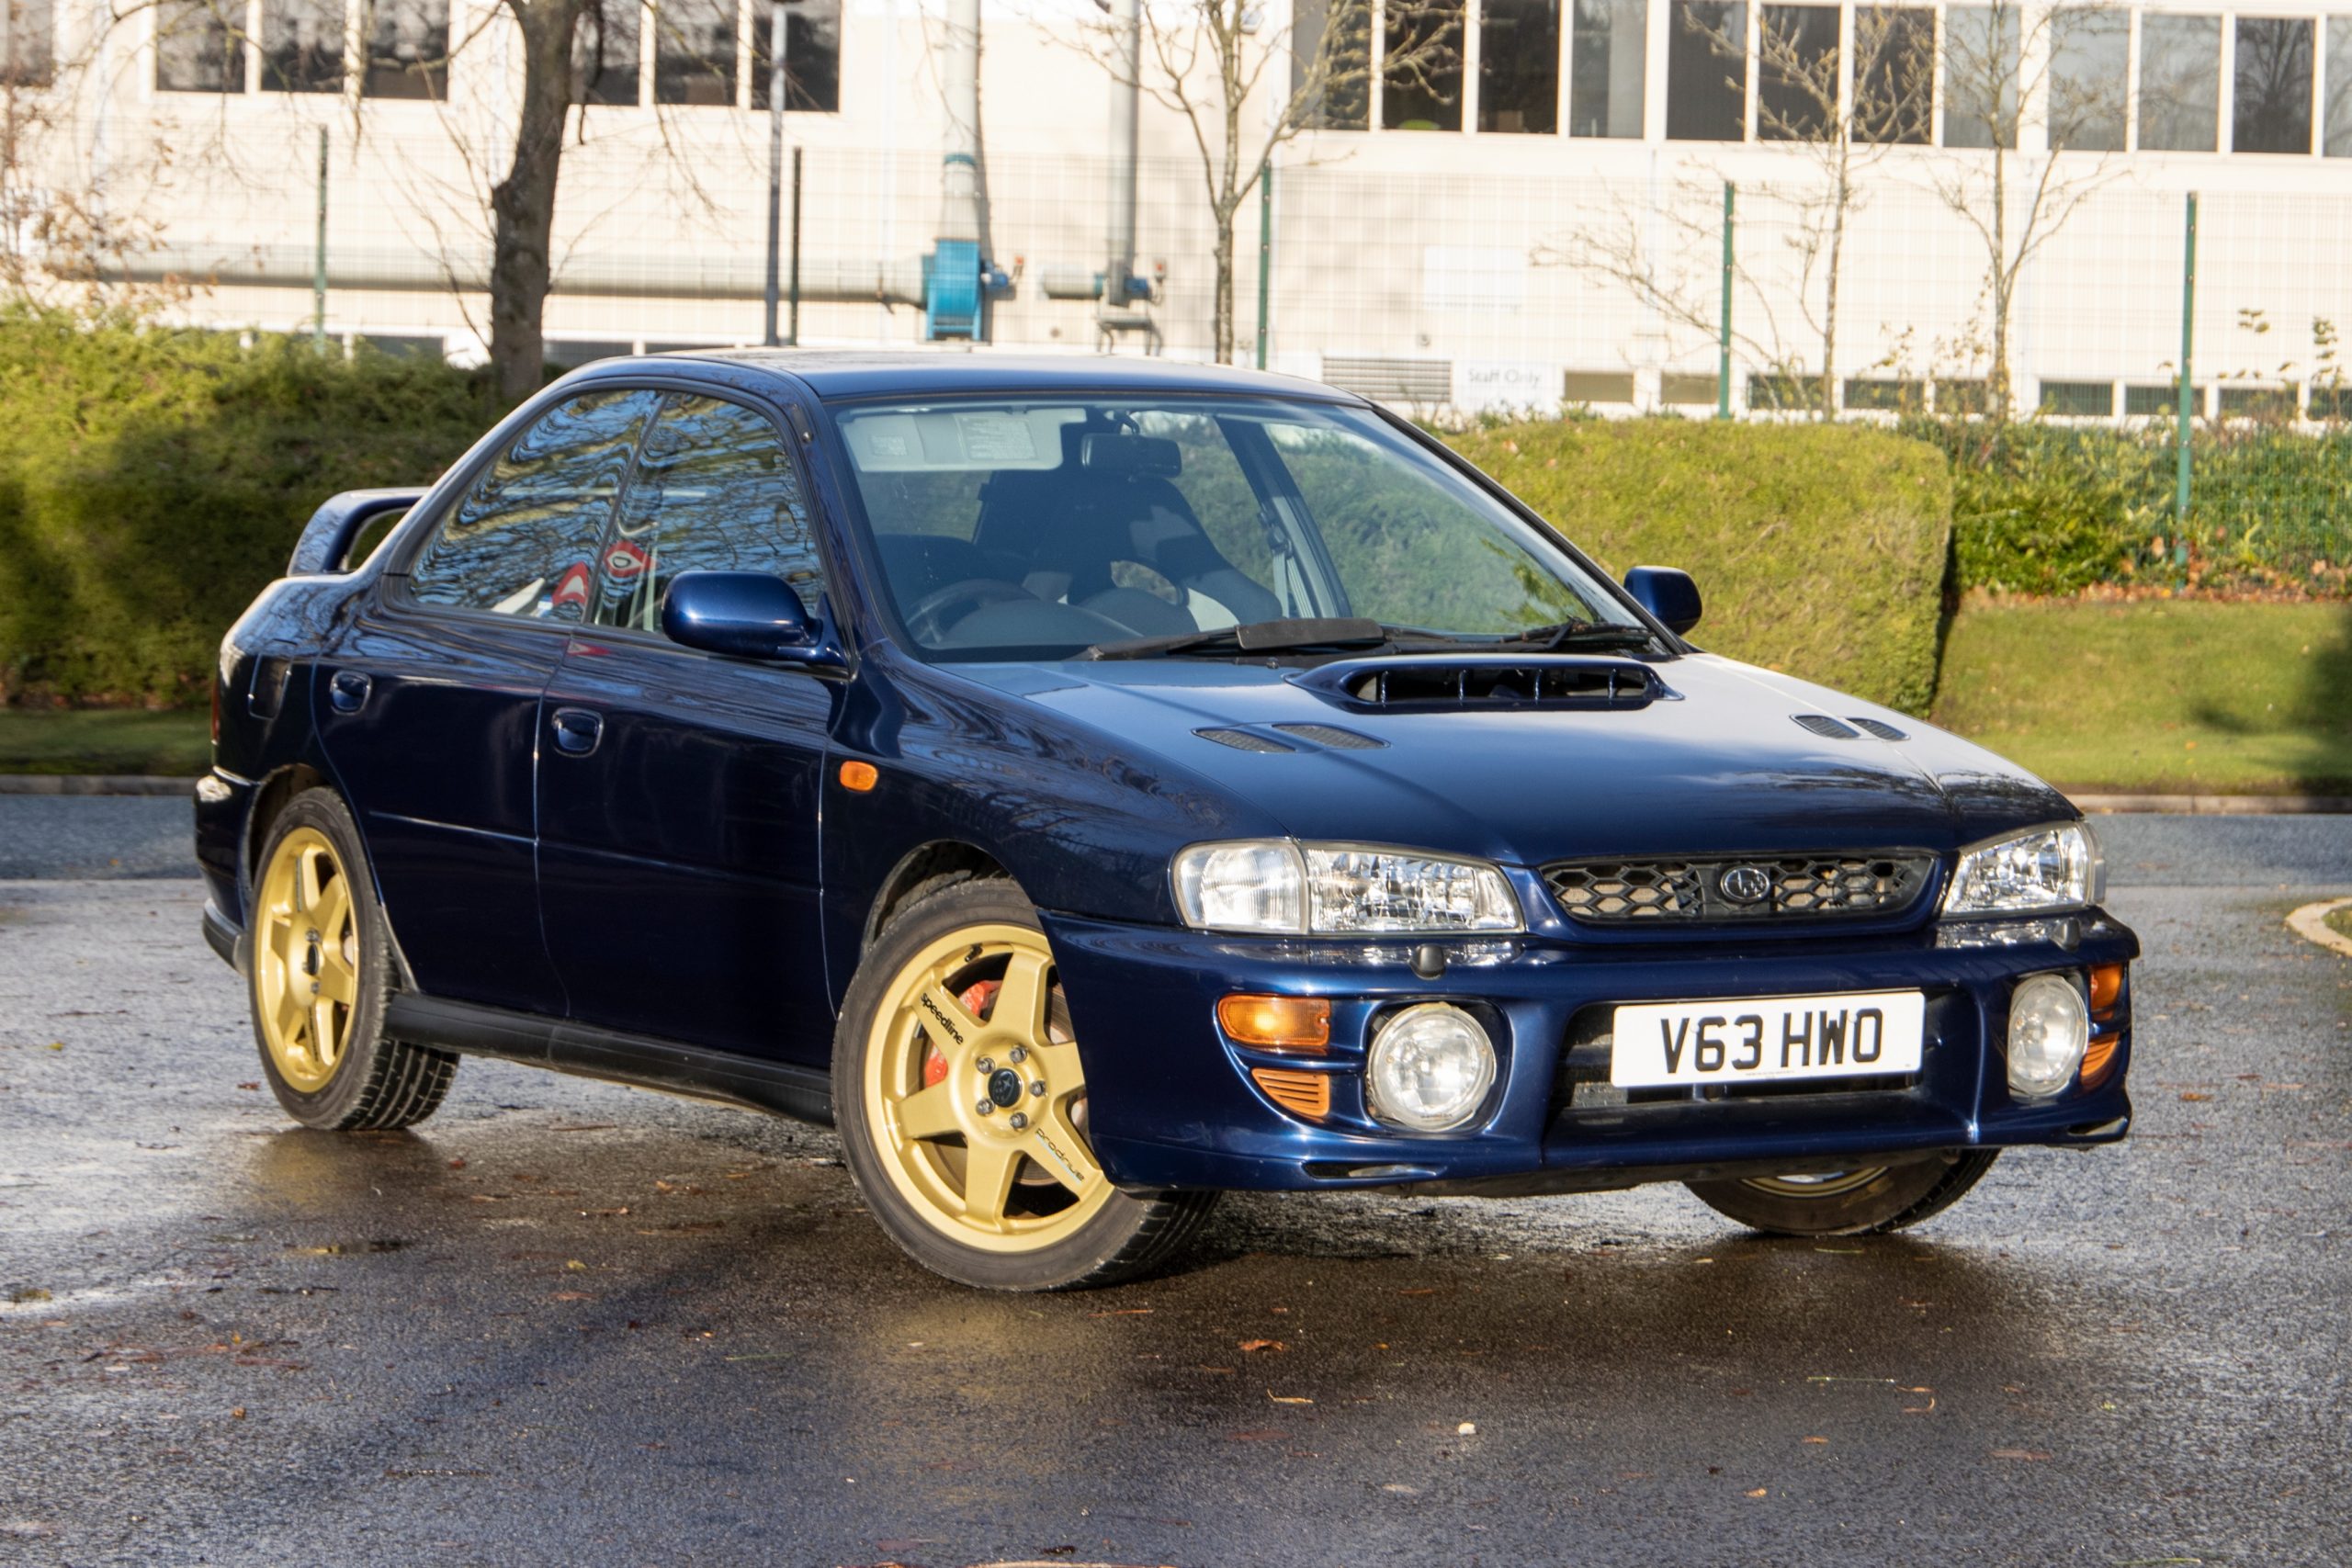 Drive buy: This early Impreza Turbo needs to go to a good home